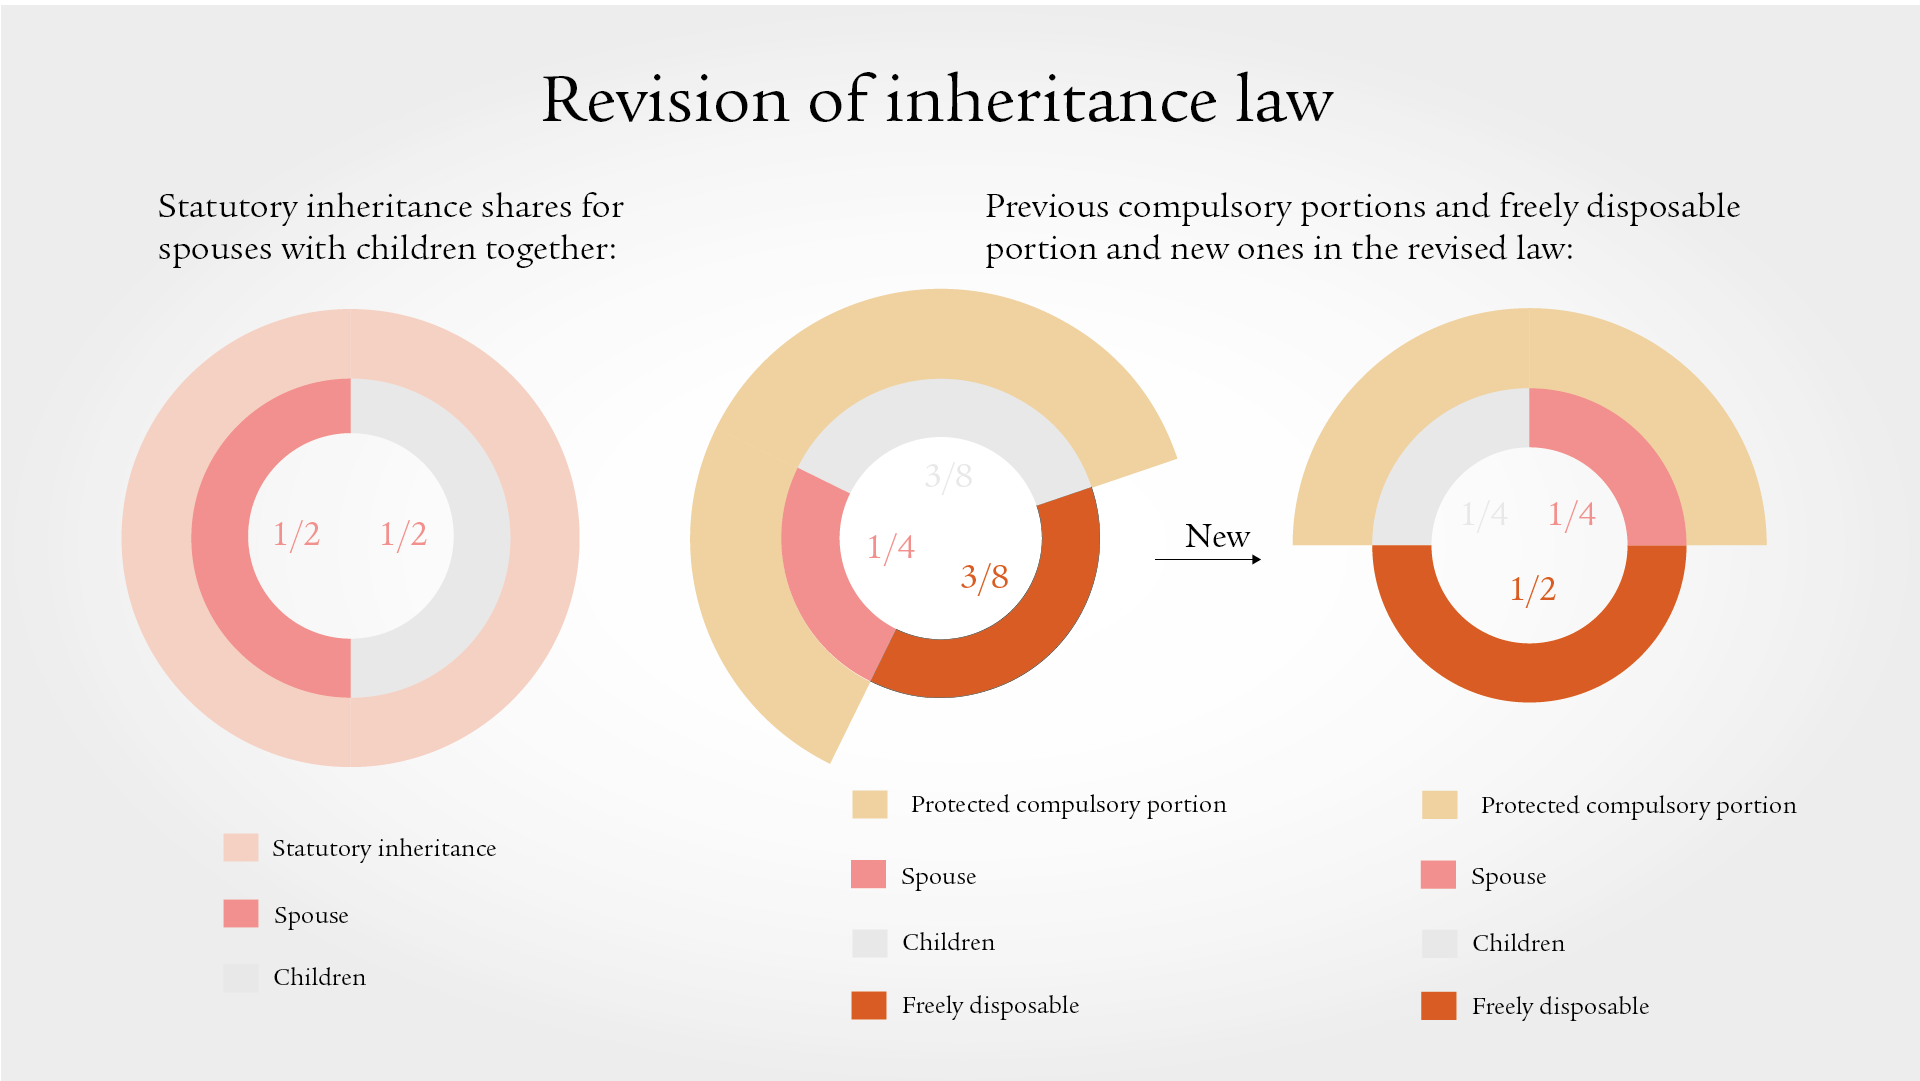 The infographic contains pie charts showing the new division of the statutory inheritance and compulsory portions of the freely disposable portion.